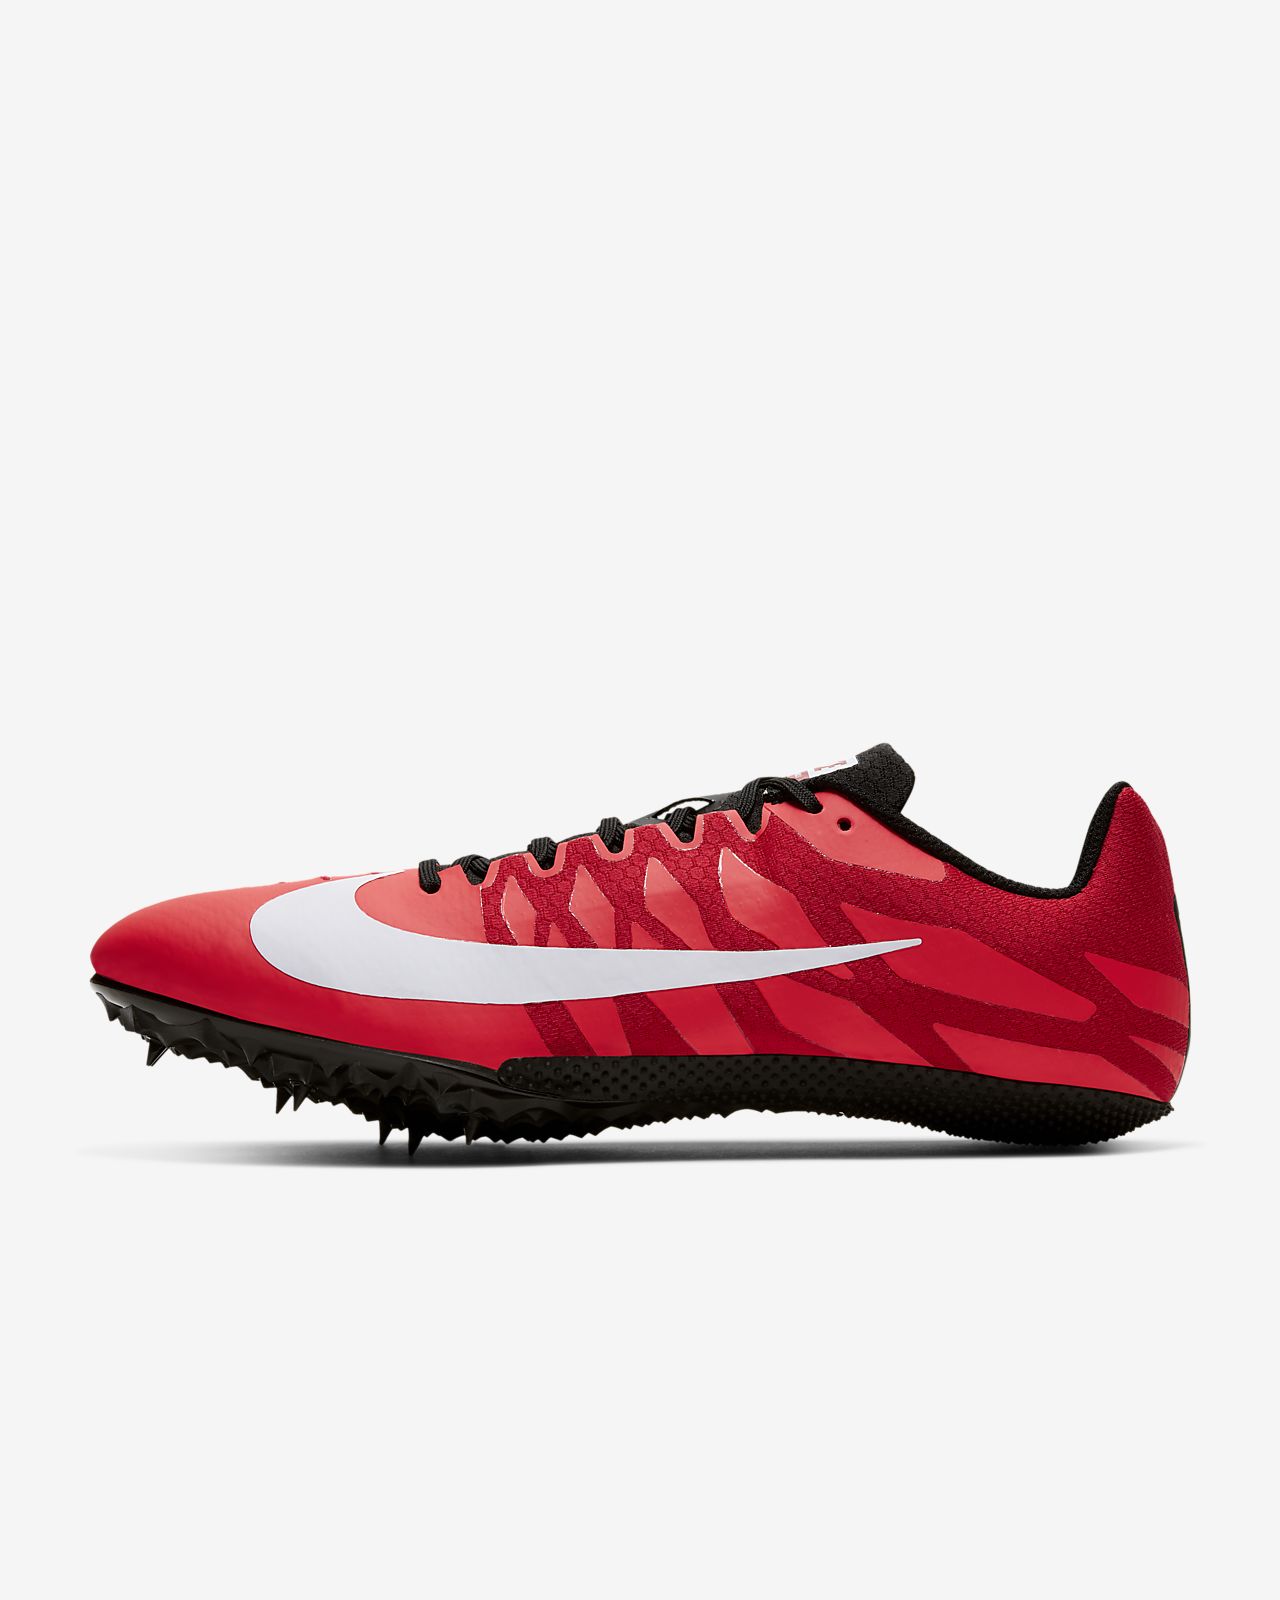 red track spikes